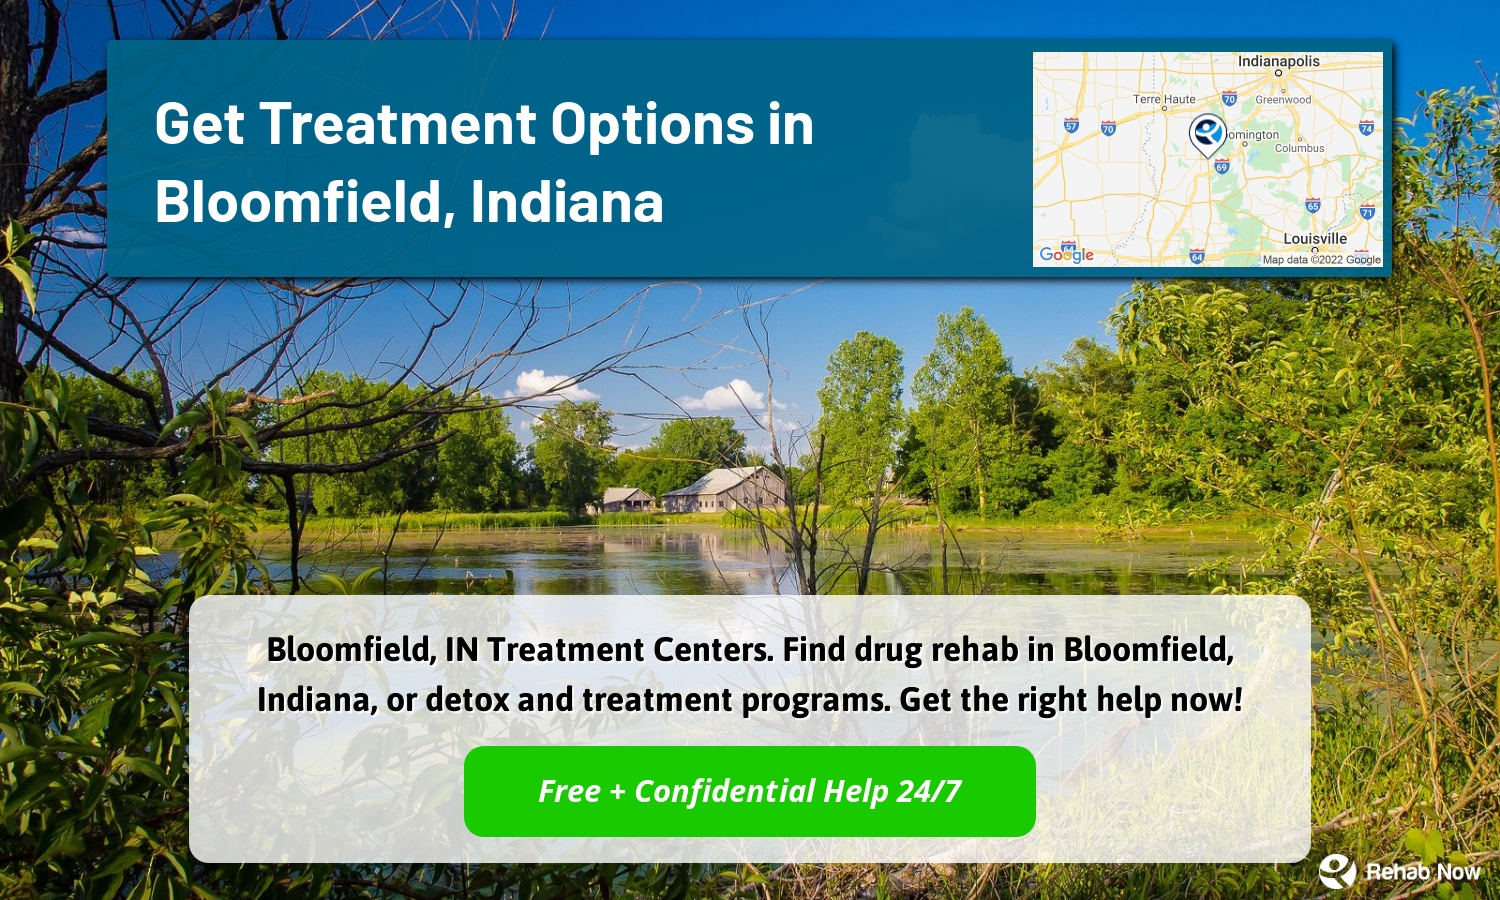 Bloomfield, IN Treatment Centers. Find drug rehab in Bloomfield, Indiana, or detox and treatment programs. Get the right help now!